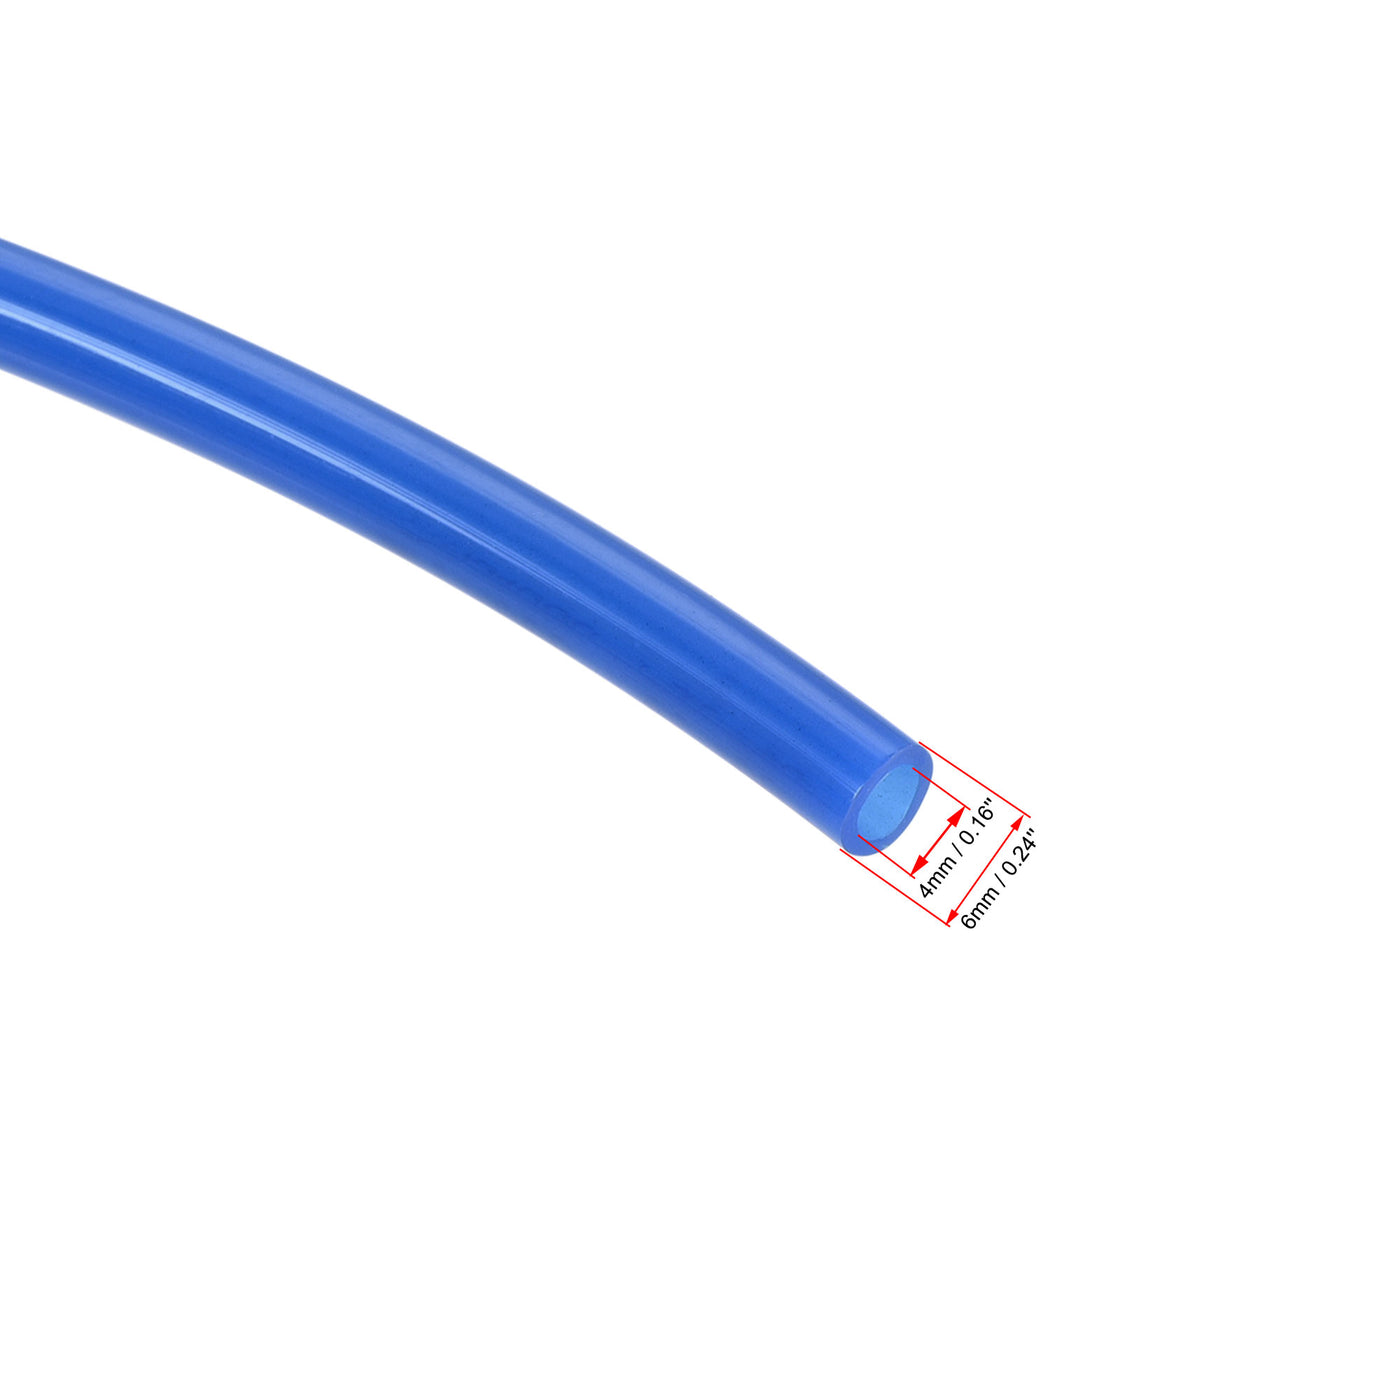 uxcell Uxcell Pneumatic 6mm OD PU Air Hose Tubing Kit 5M Blue with Push to Connect Fittings